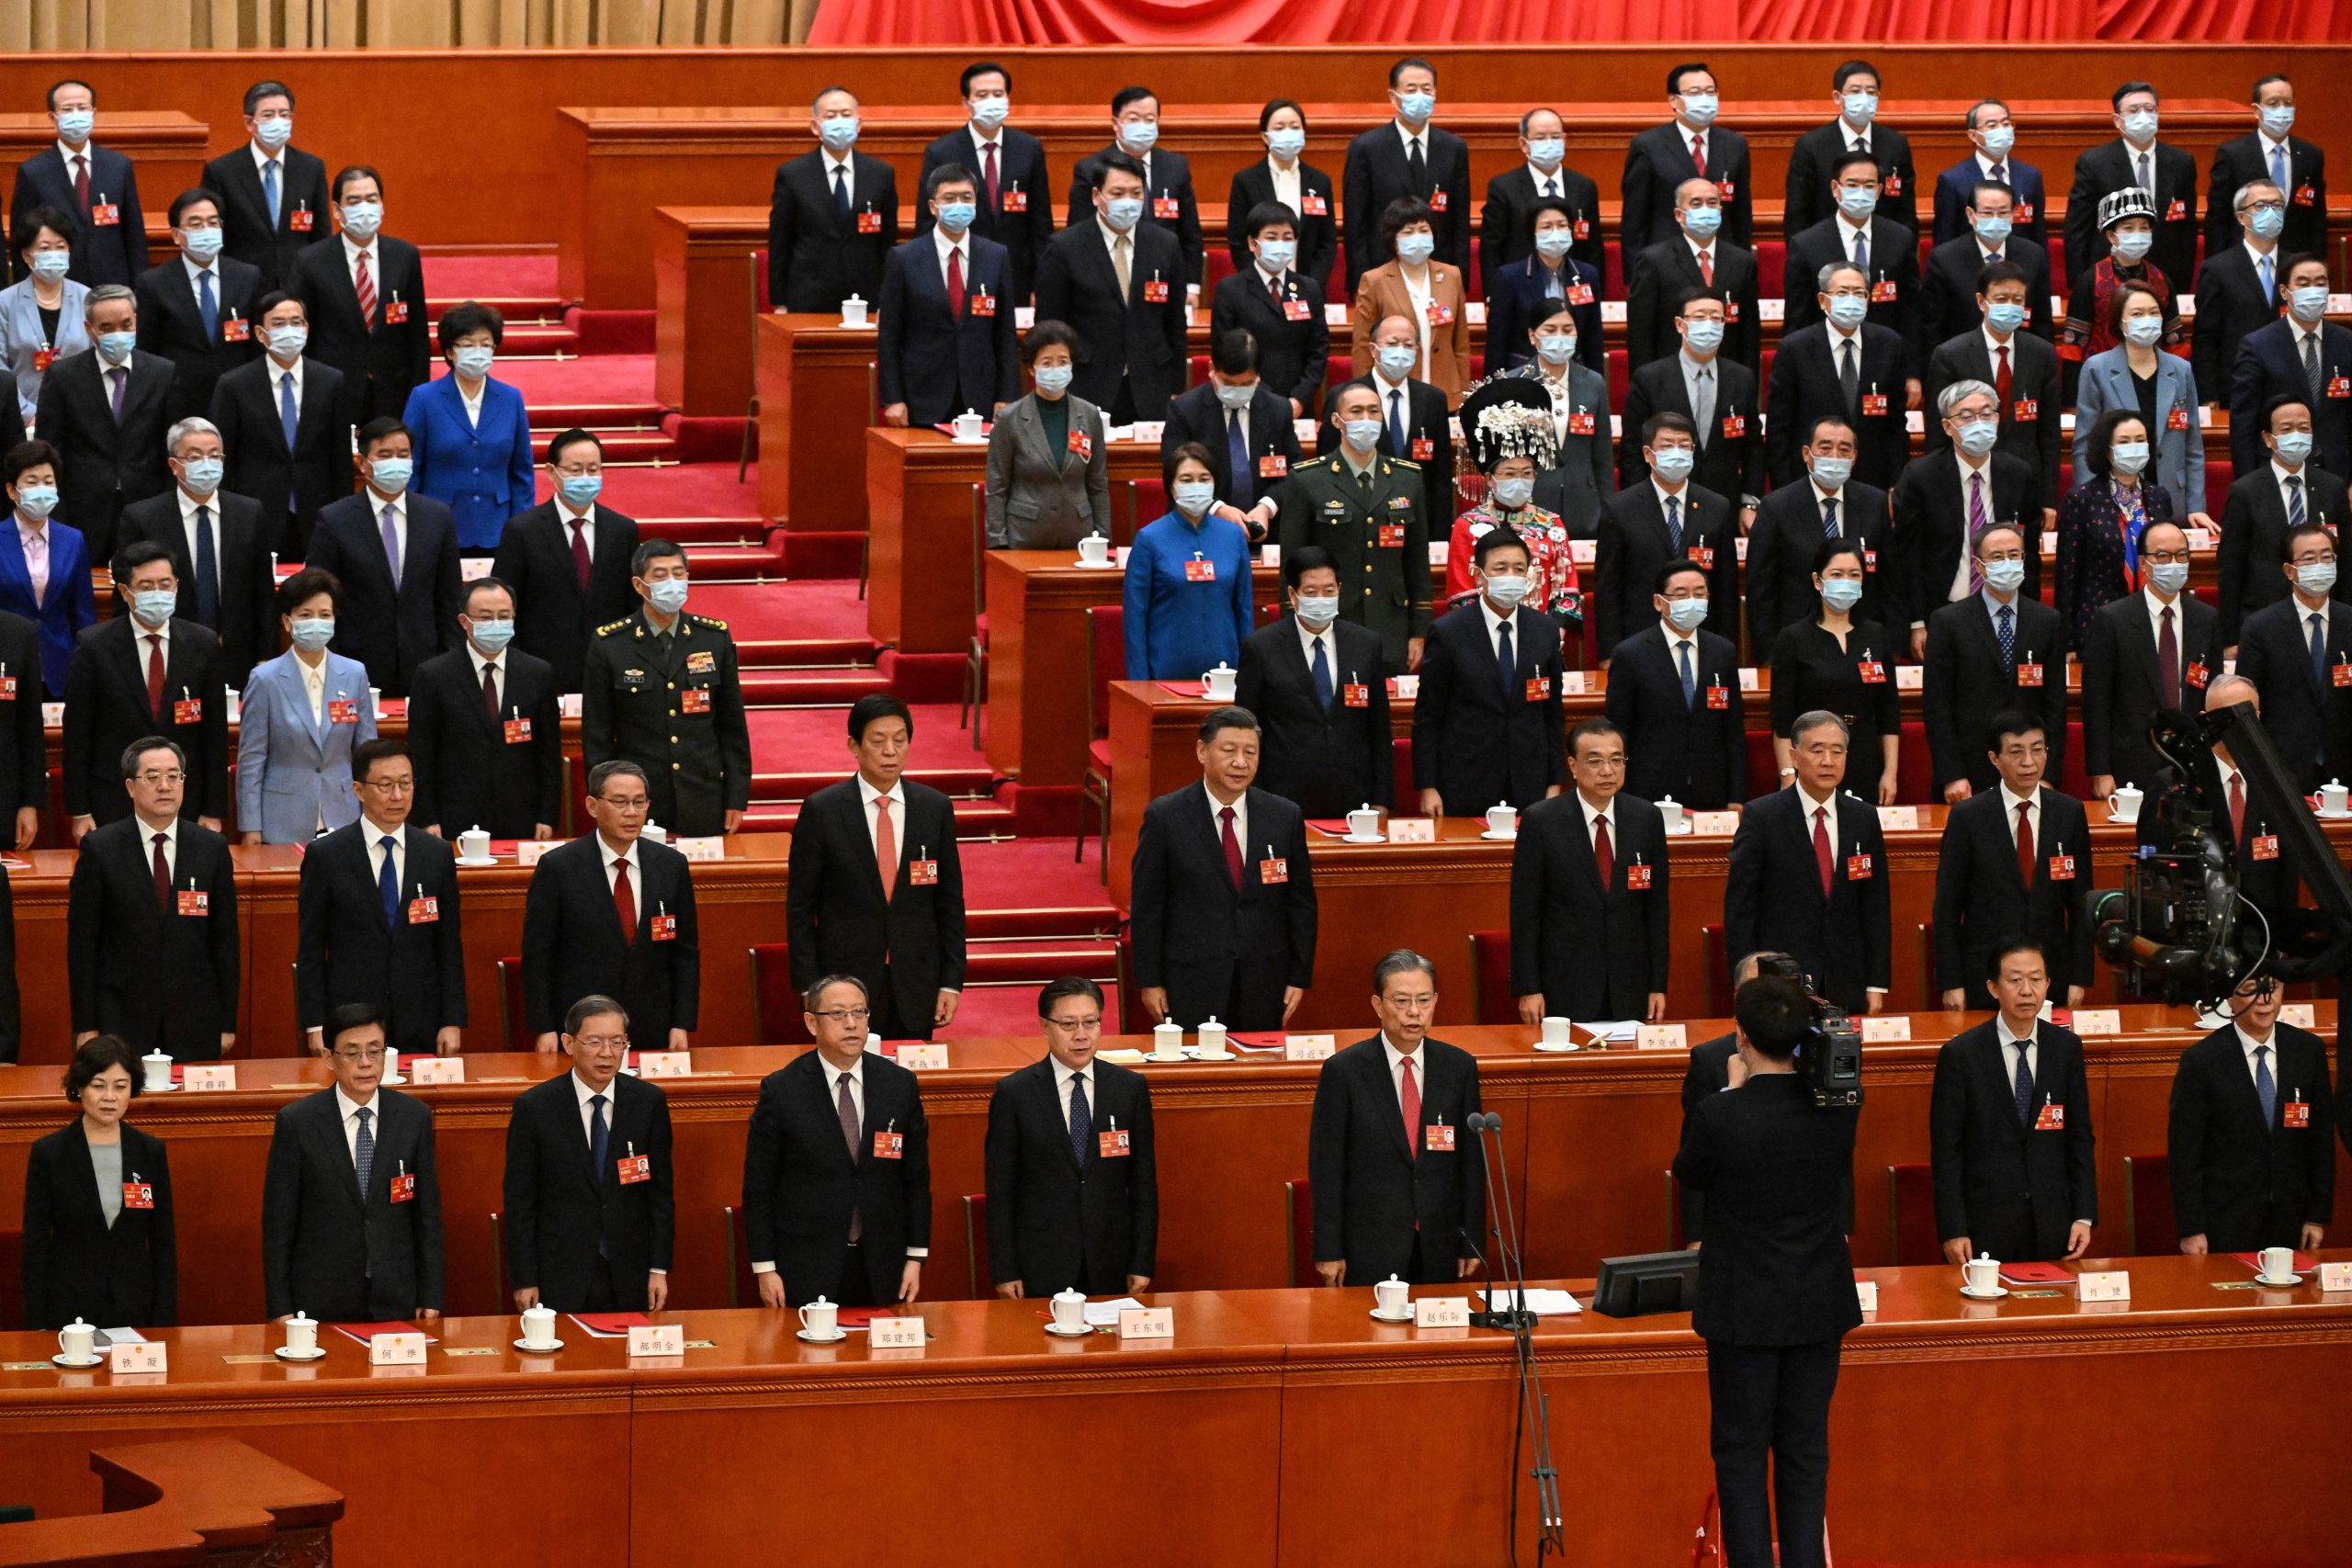 China's Annual Parliament Meeting: What You Need to Know